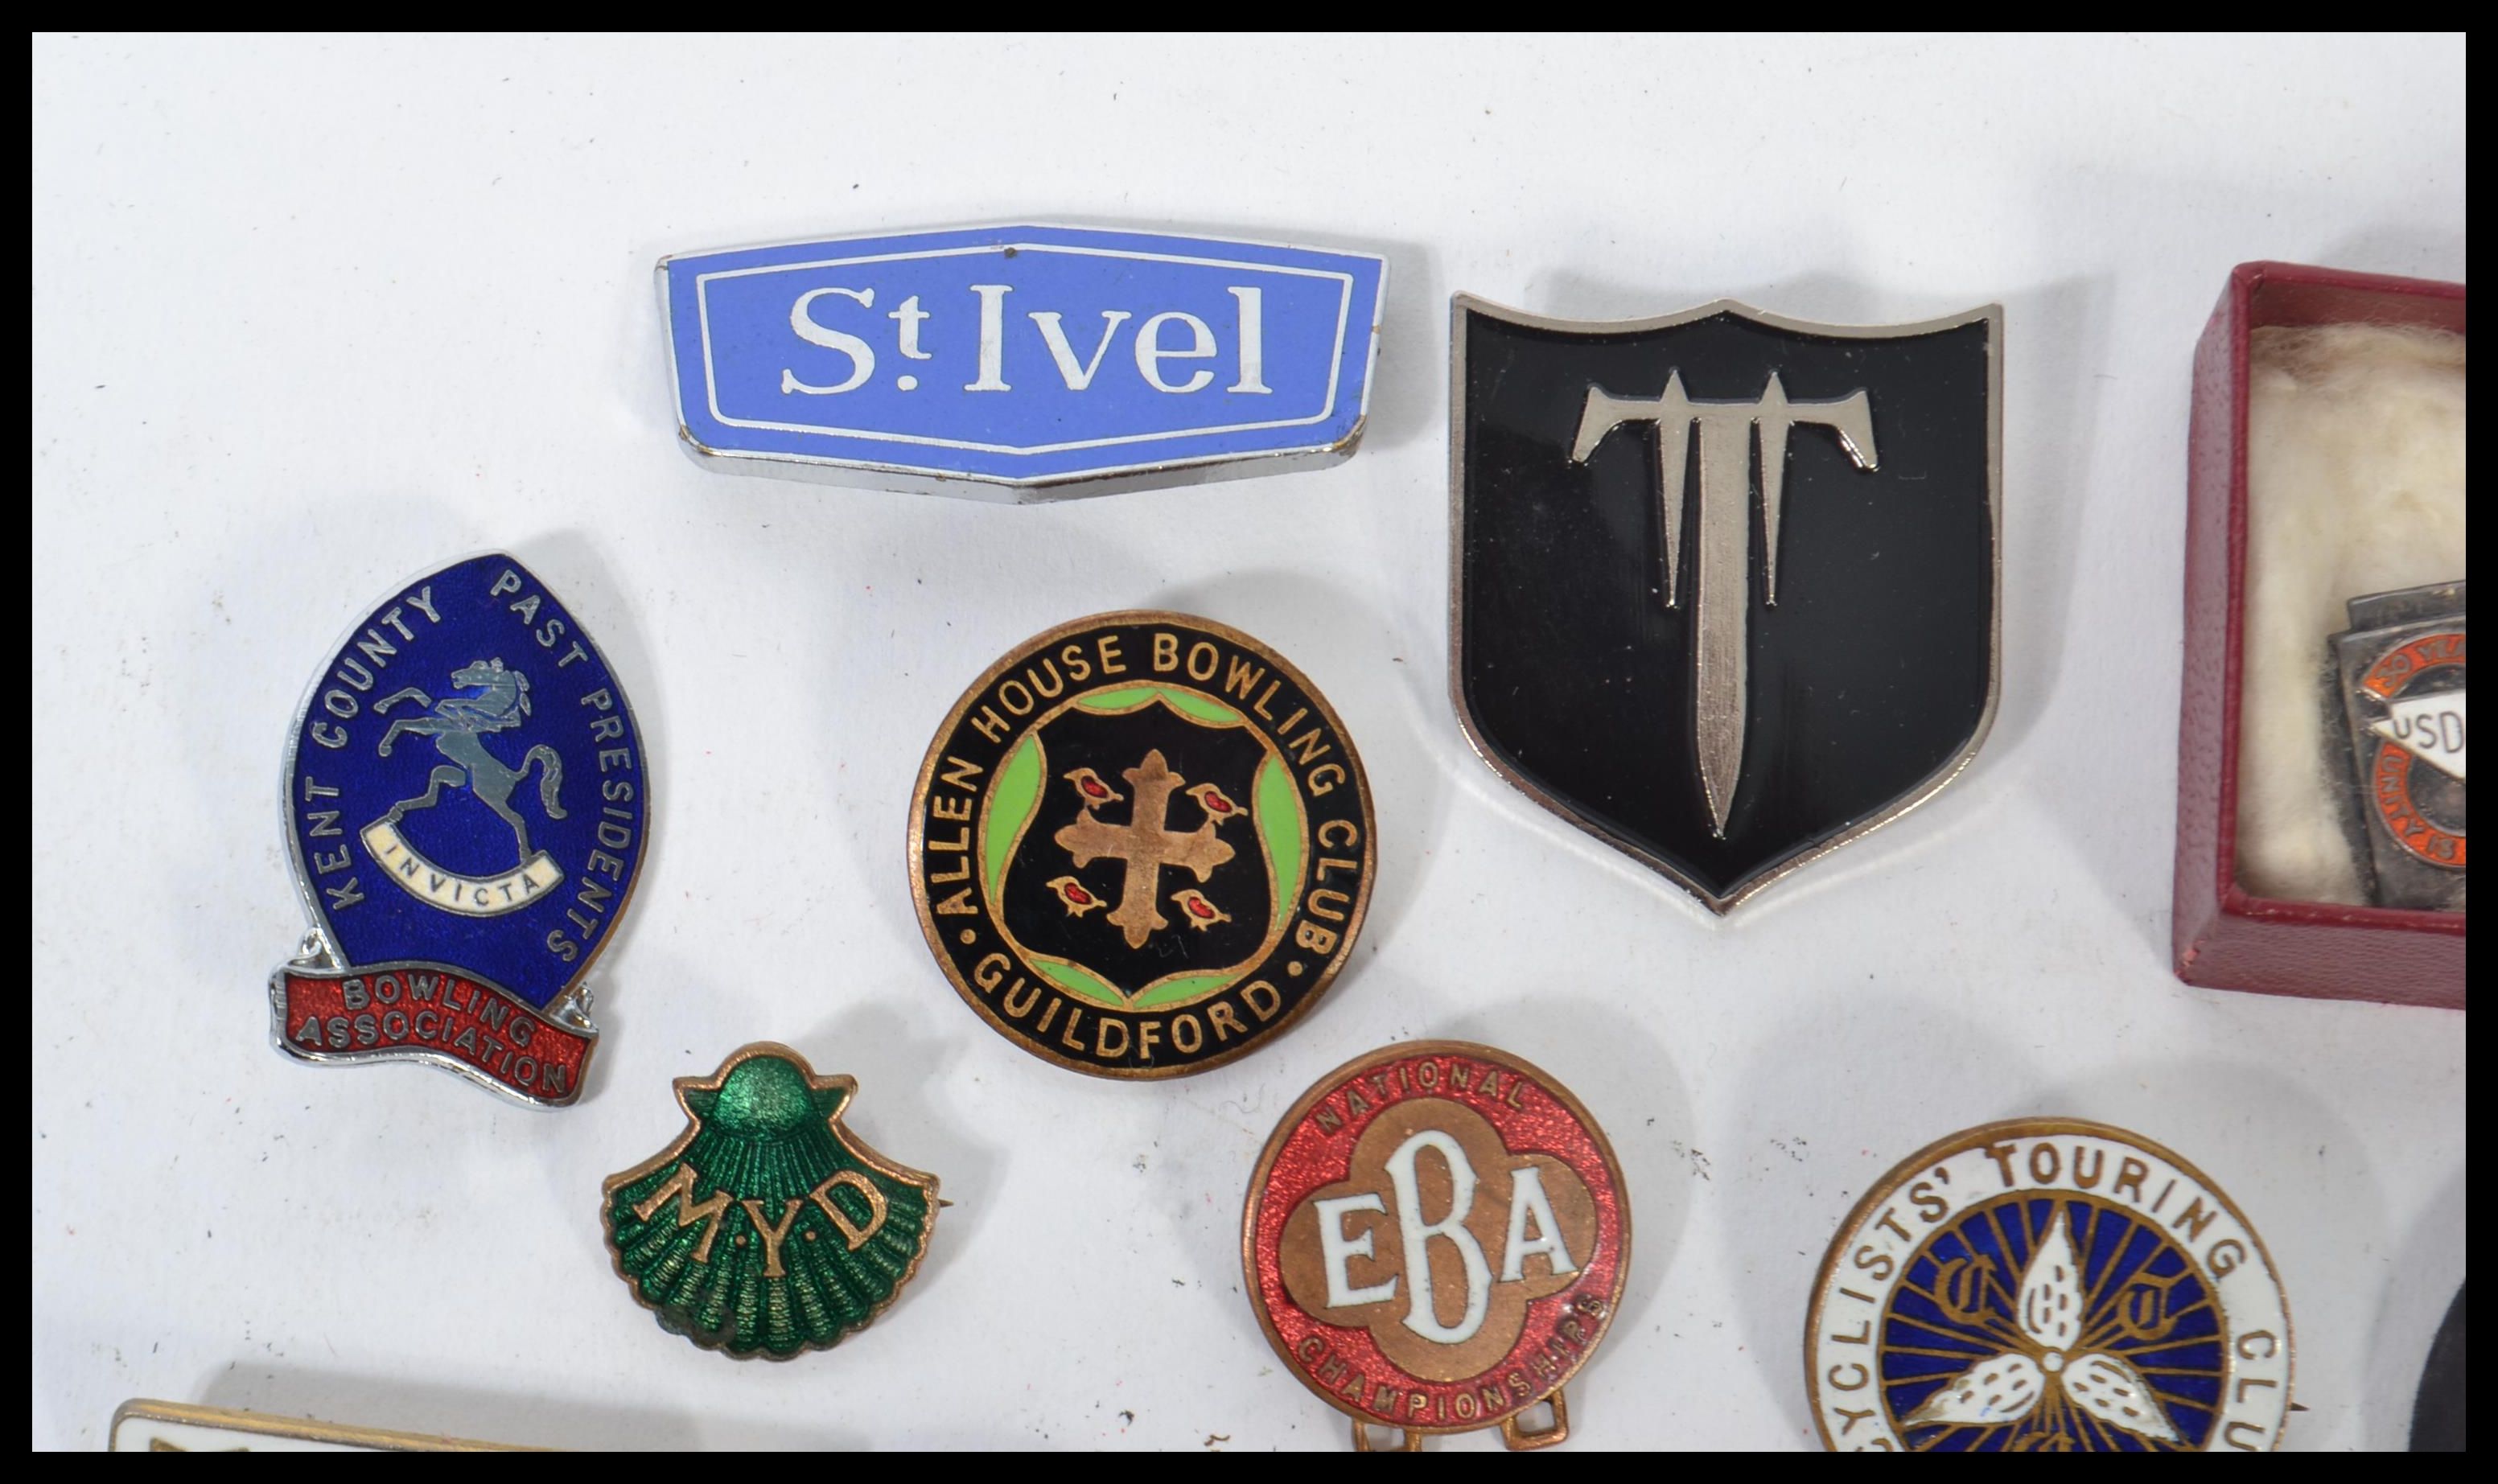 A good collection of vintage Enamel pin badges dating from the first half of the 20th century to - Image 10 of 10